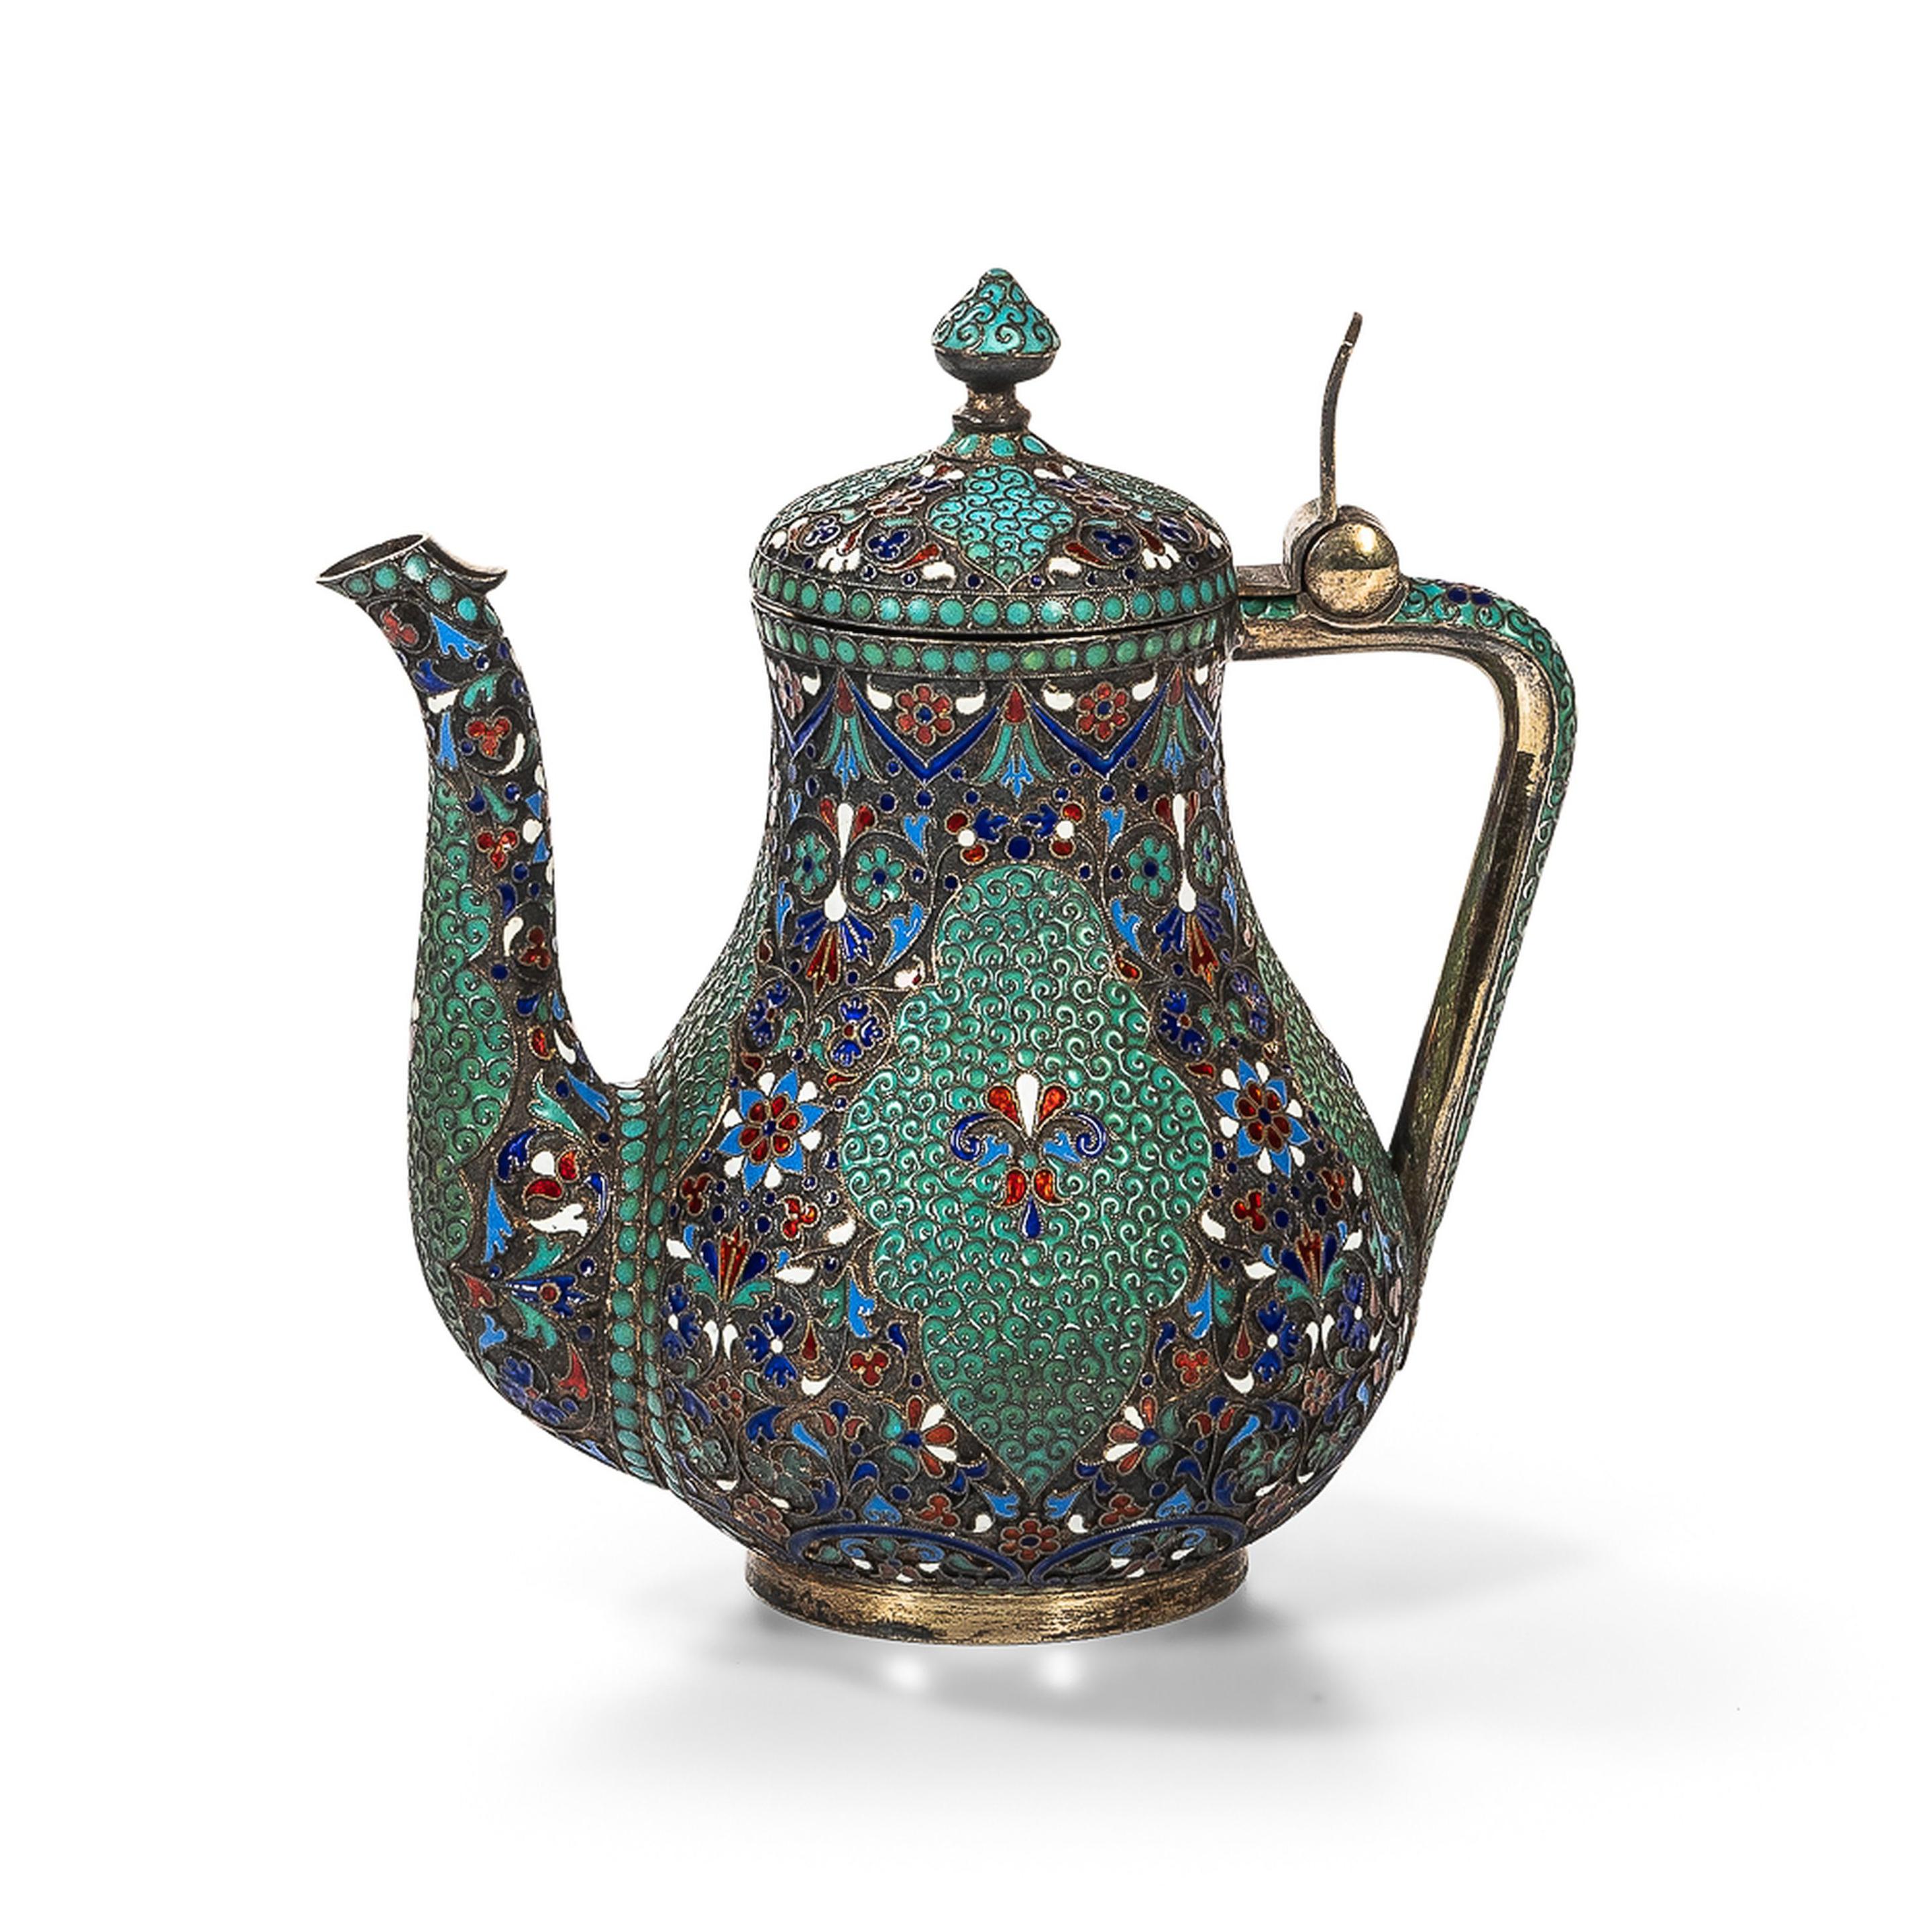 RUSSIAN ENAMEL AND .875 SILVER-GILT